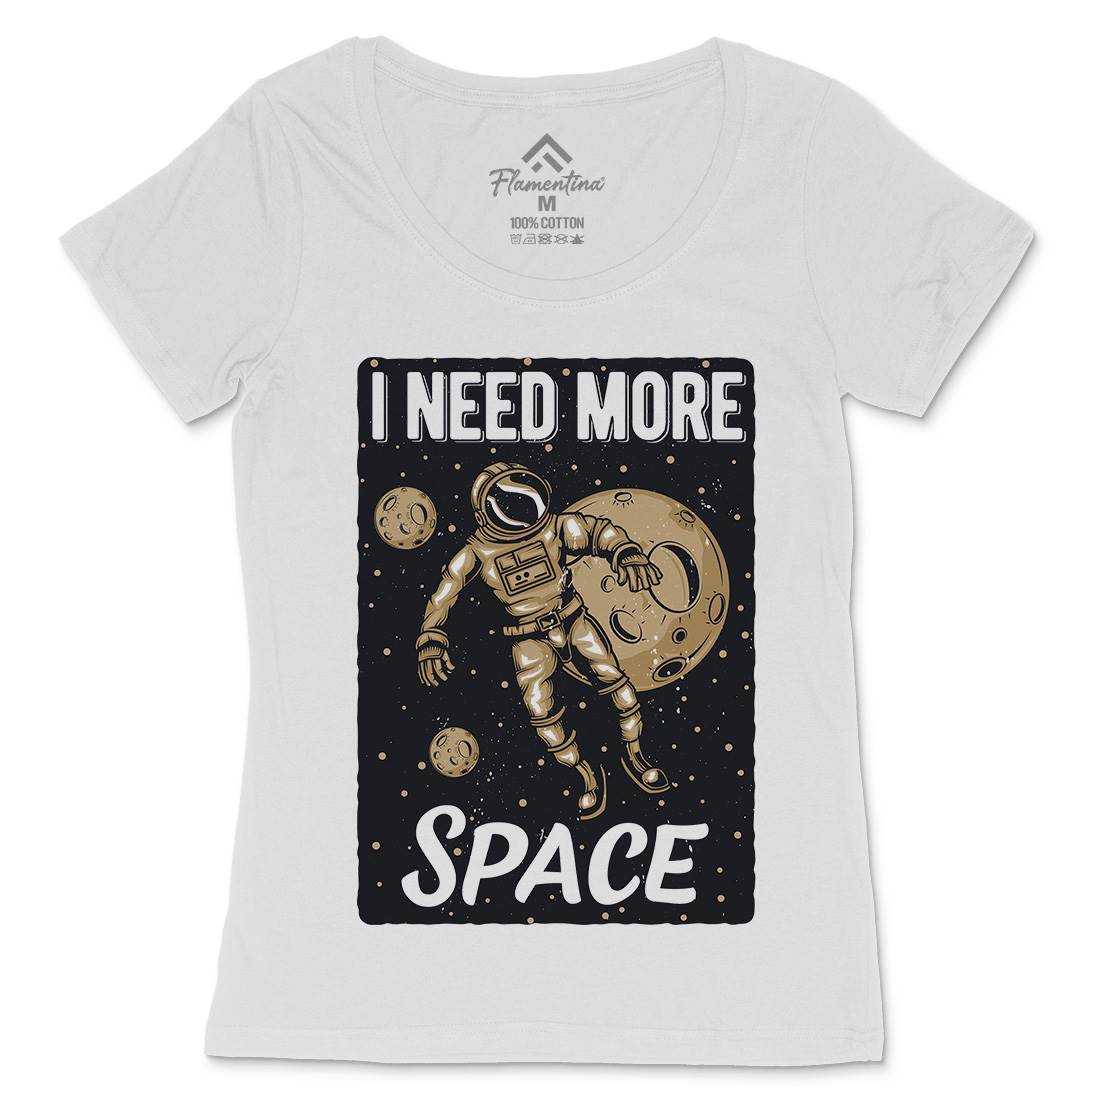 Need More Womens Scoop Neck T-Shirt Space B168